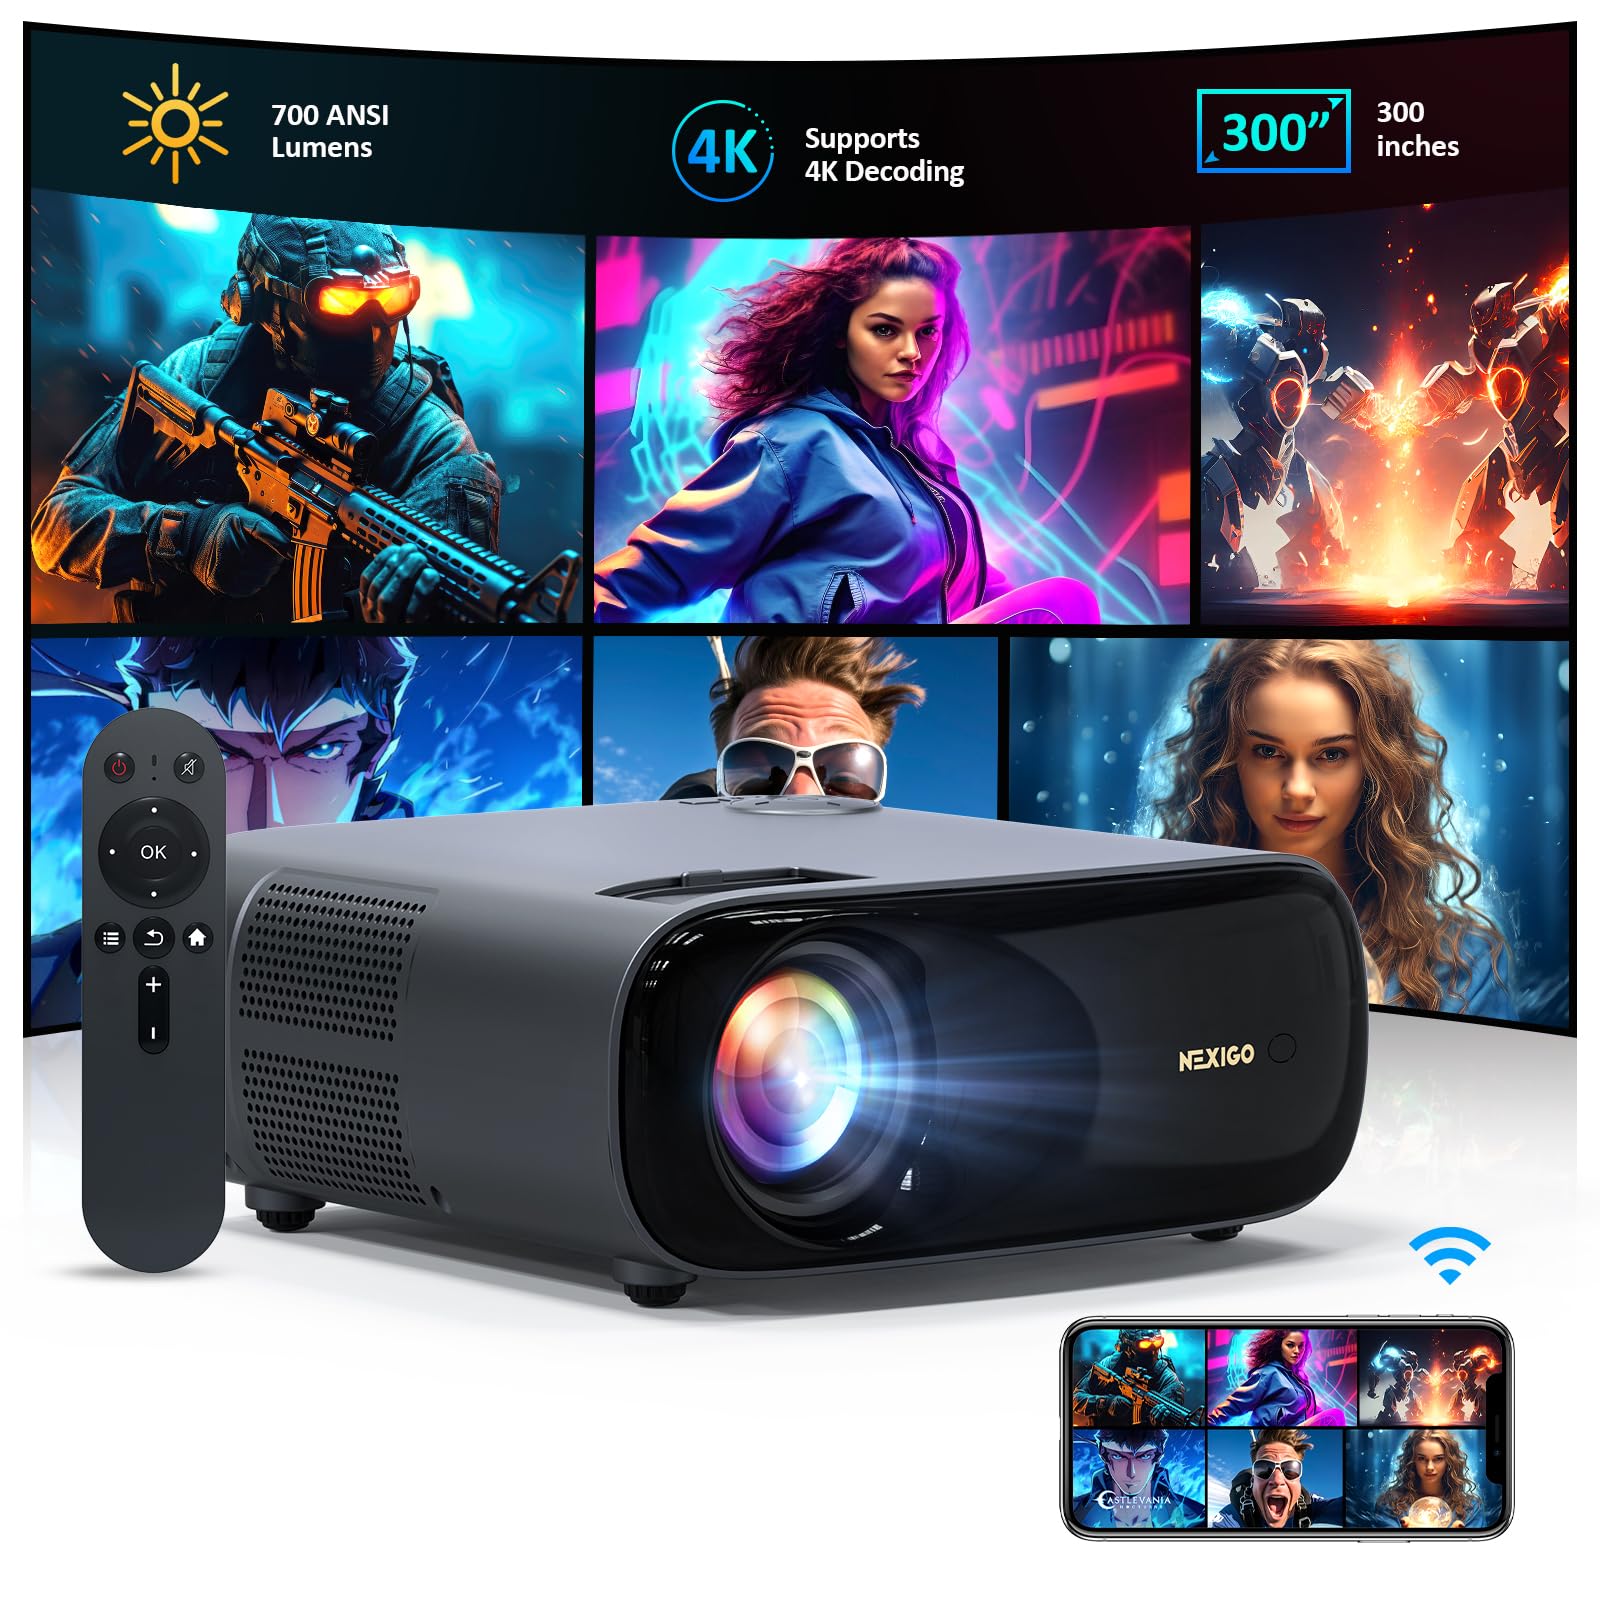 NexiGo PJ40 (Gen 3) Projector with WiFi and Bluetooth, D65 Calibrated, Native 1080P - $189.99 after coupon